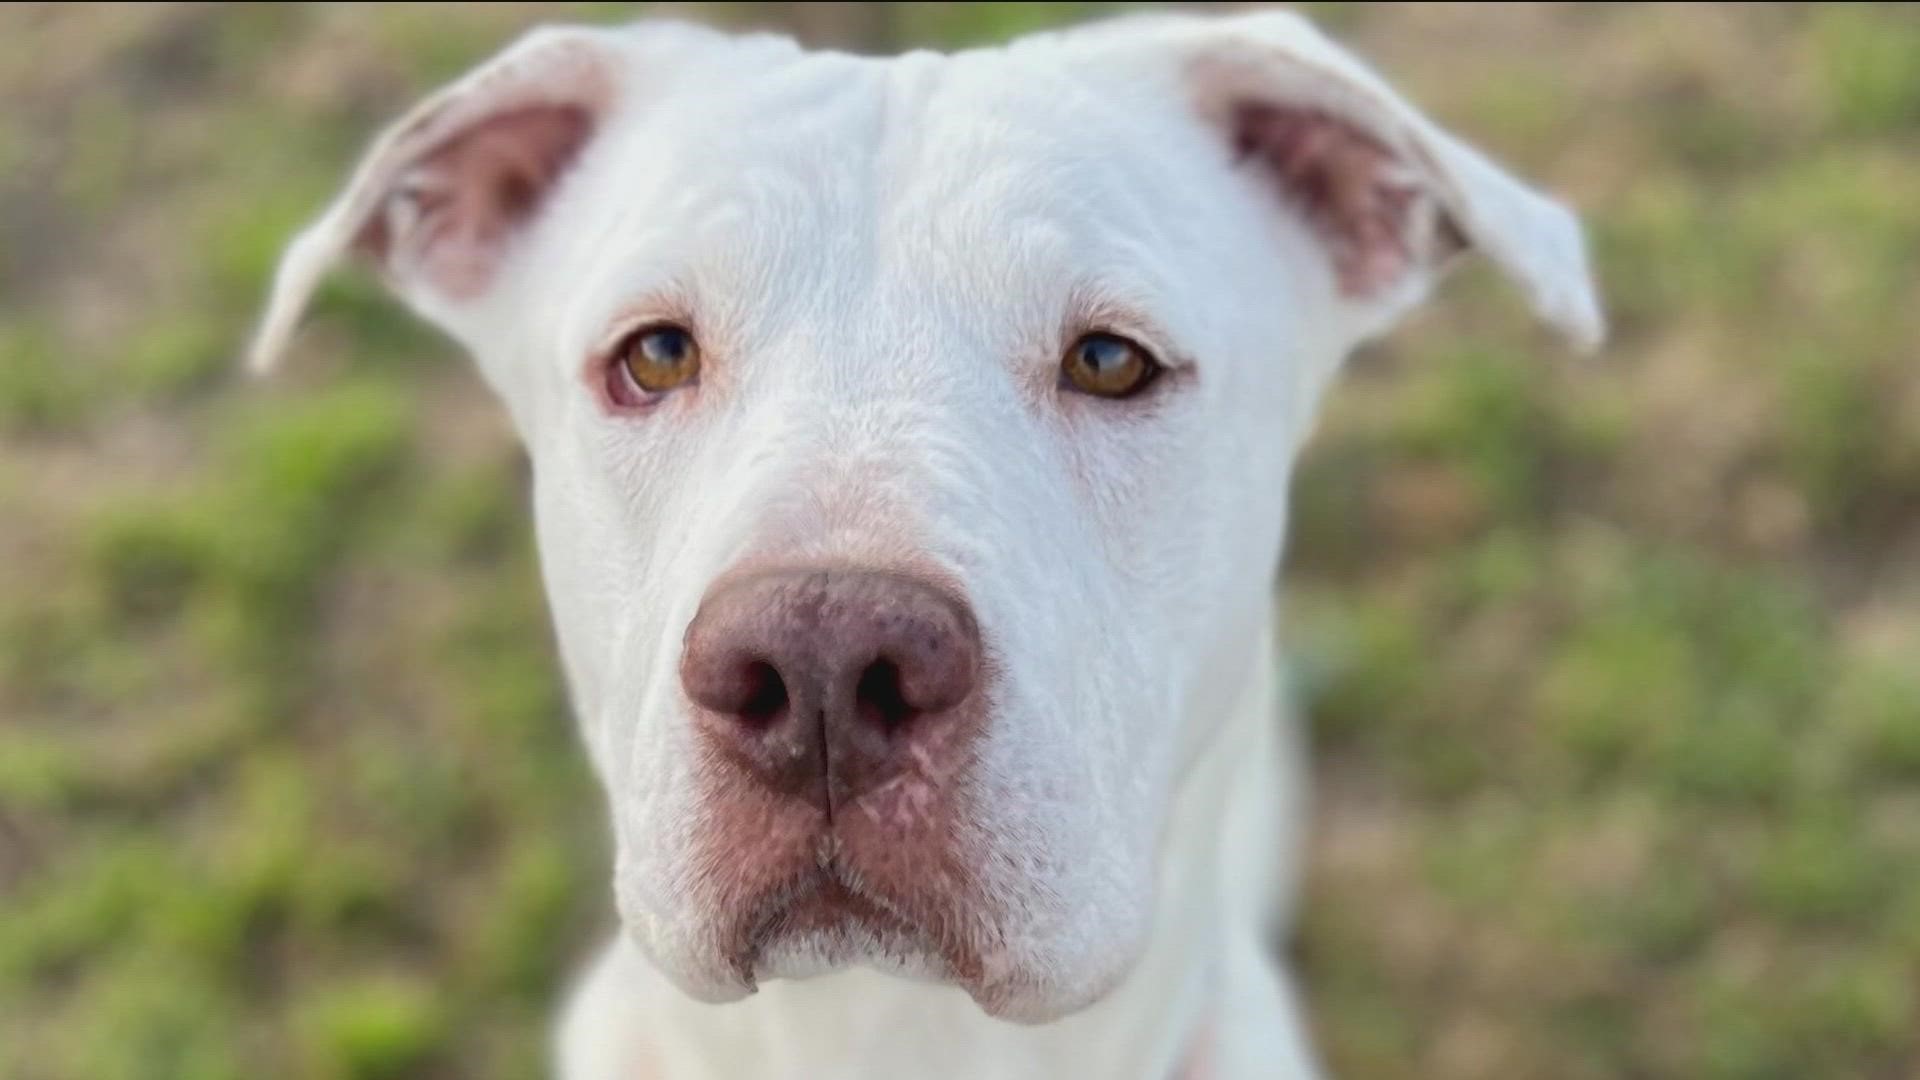 Every Friday on KVUE Midday, we introduce you to a new pet looking for a forever home!